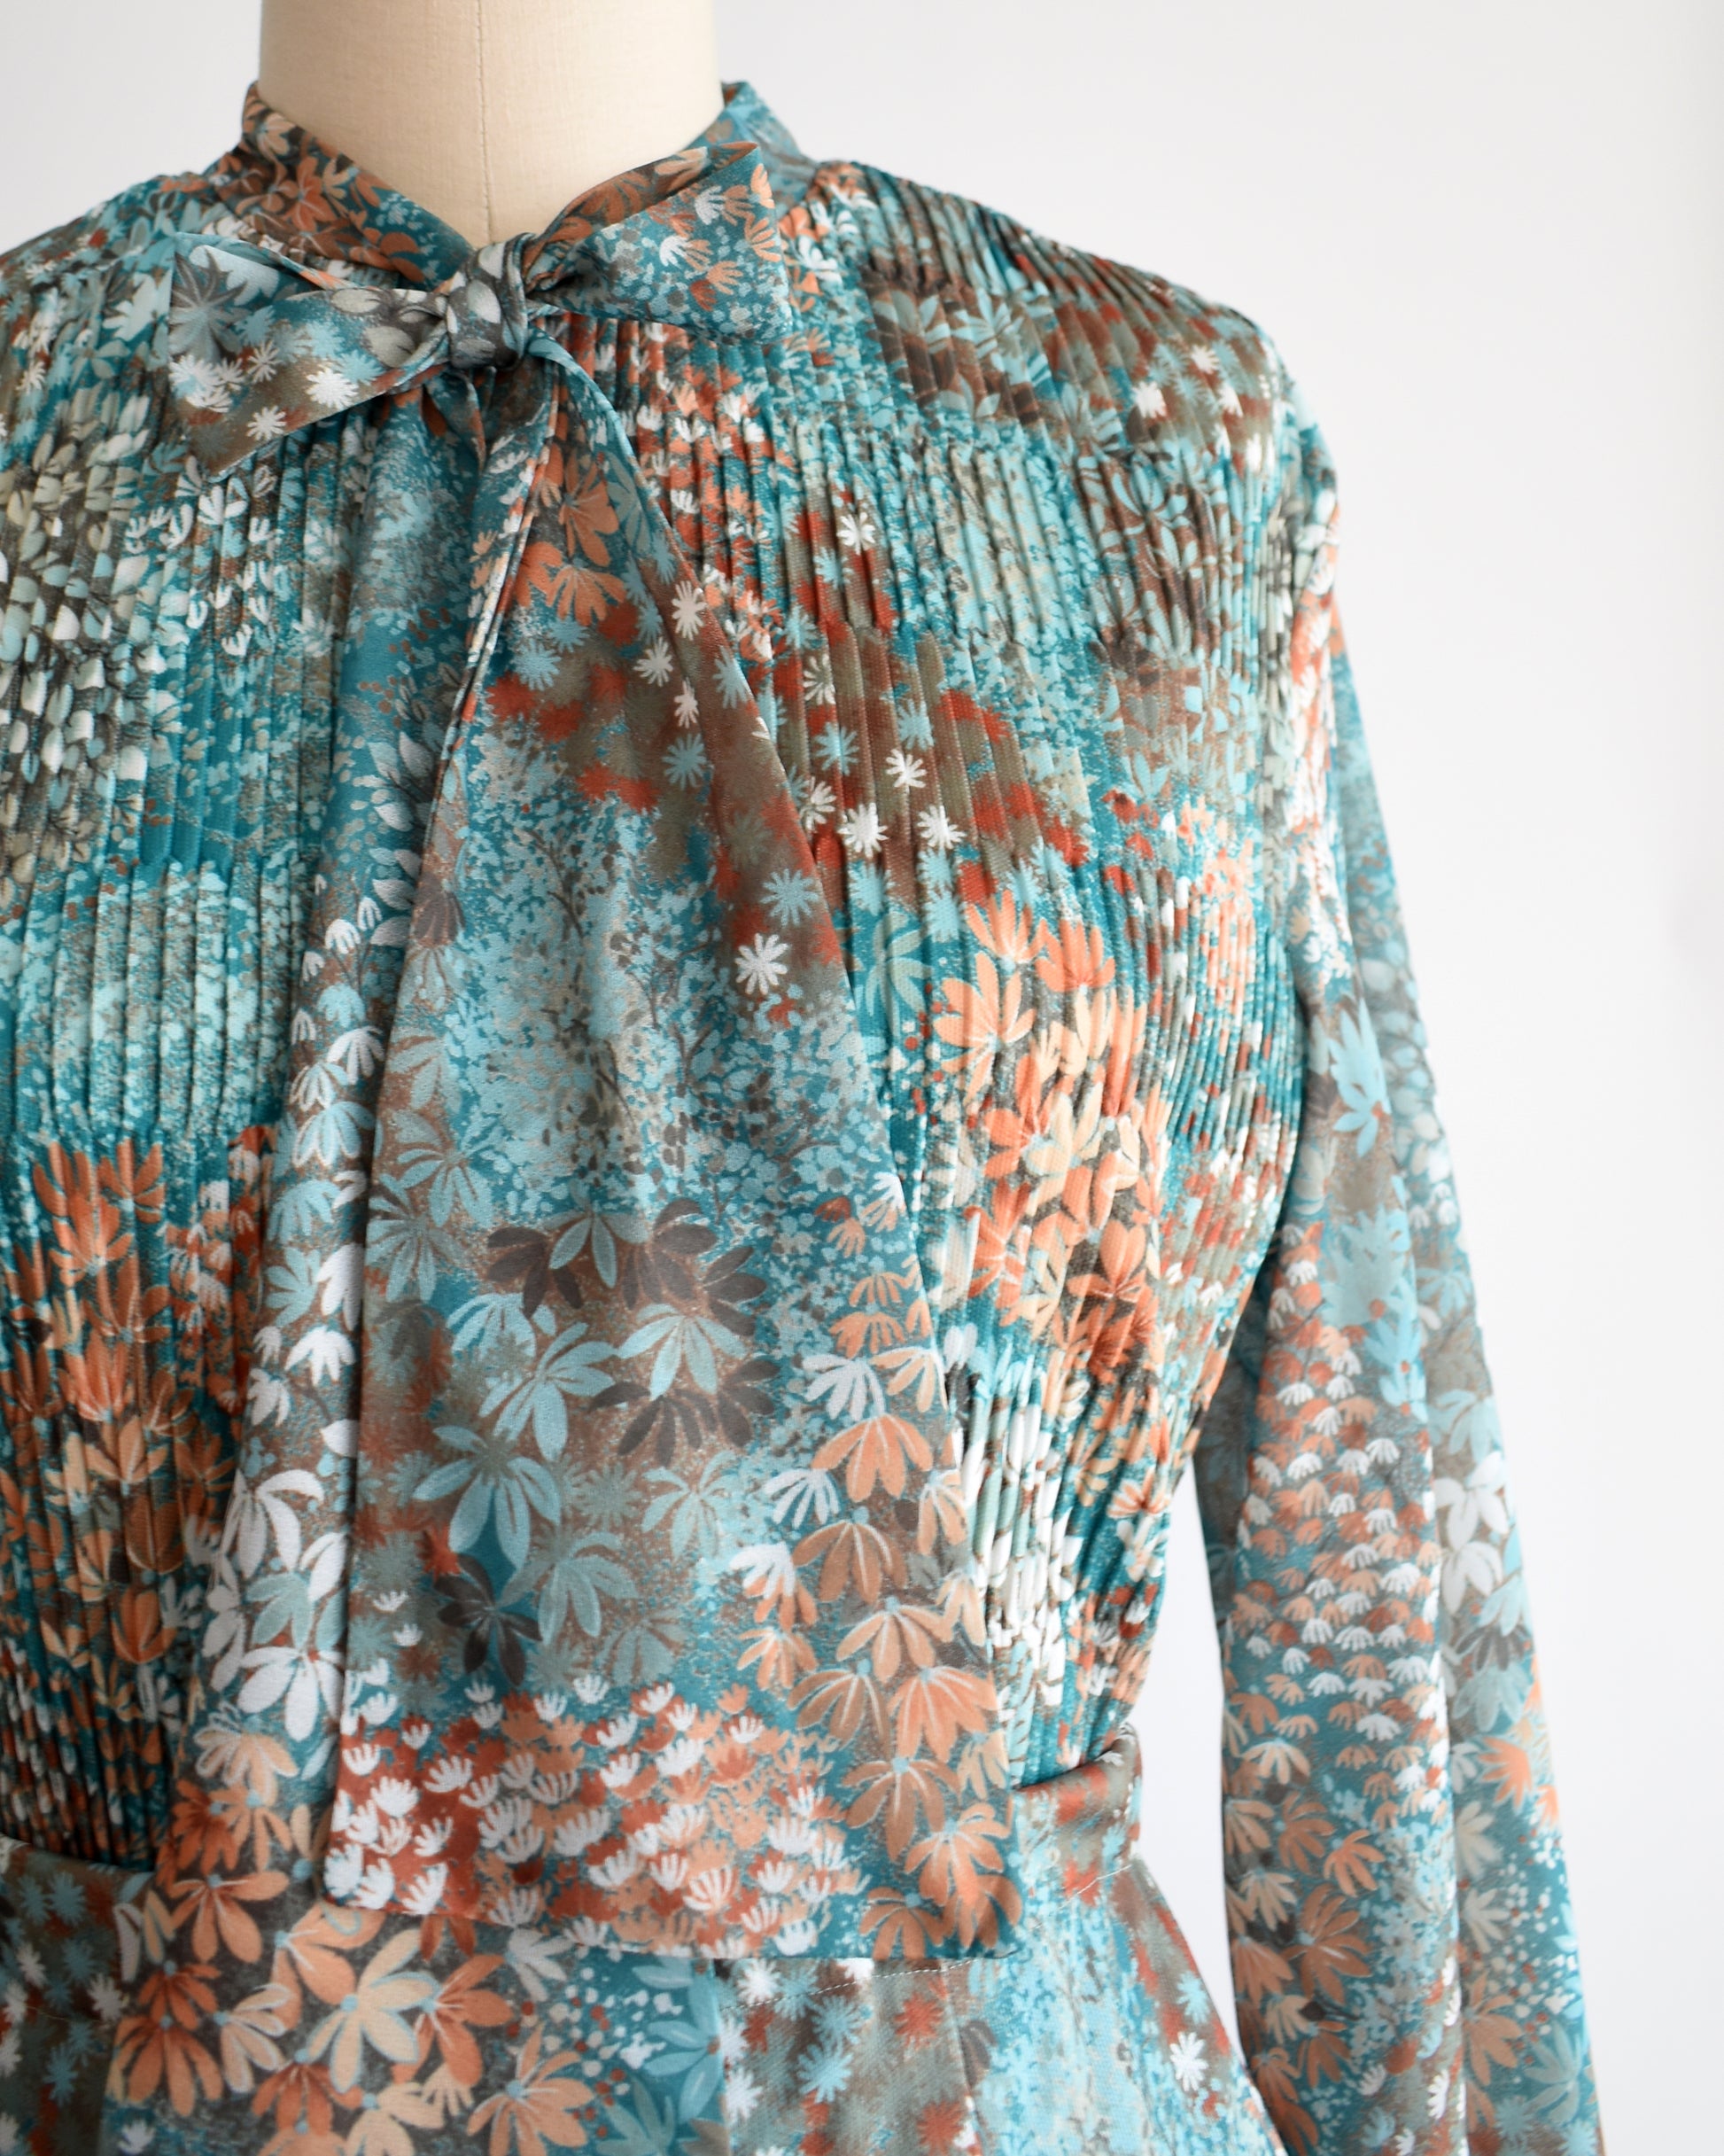 Close up of the blouse which shows the ascot bow, micro-pleats, and floral print